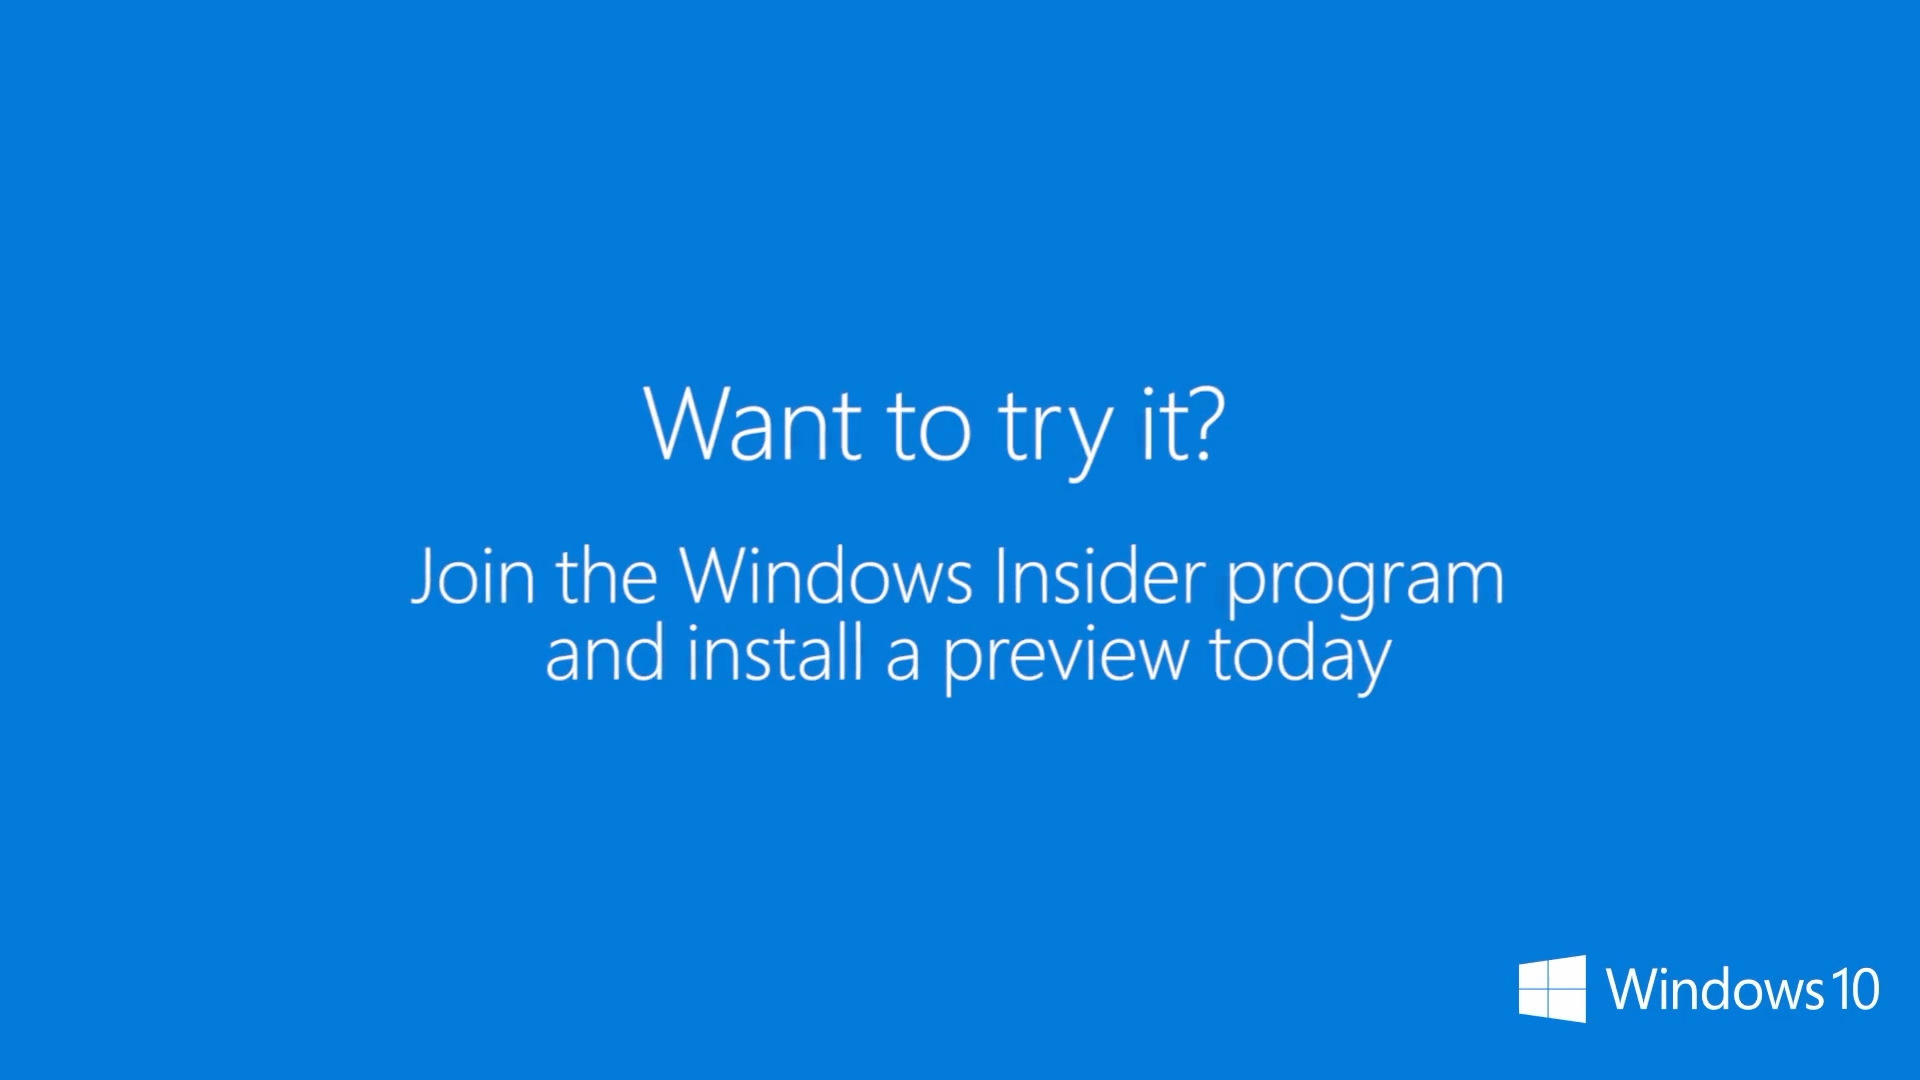 Windows 10 Insider Preview Build 14971 for PC